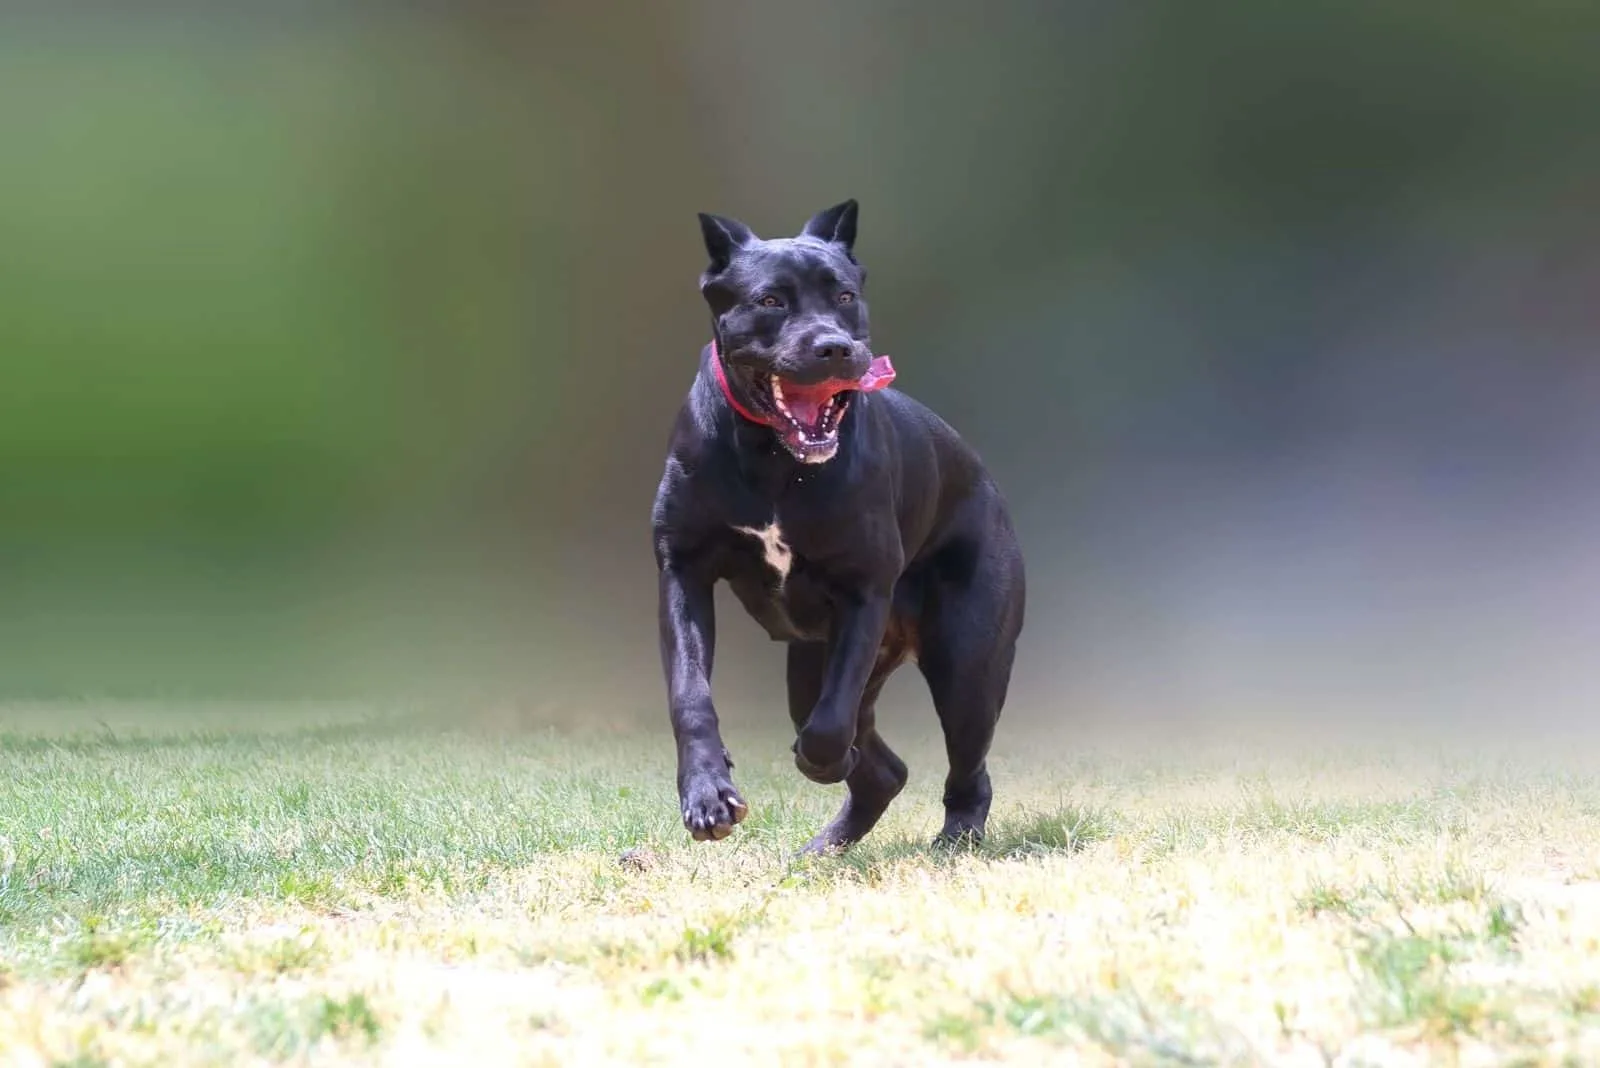 cane corso jumping and running in blurred background outdoors 